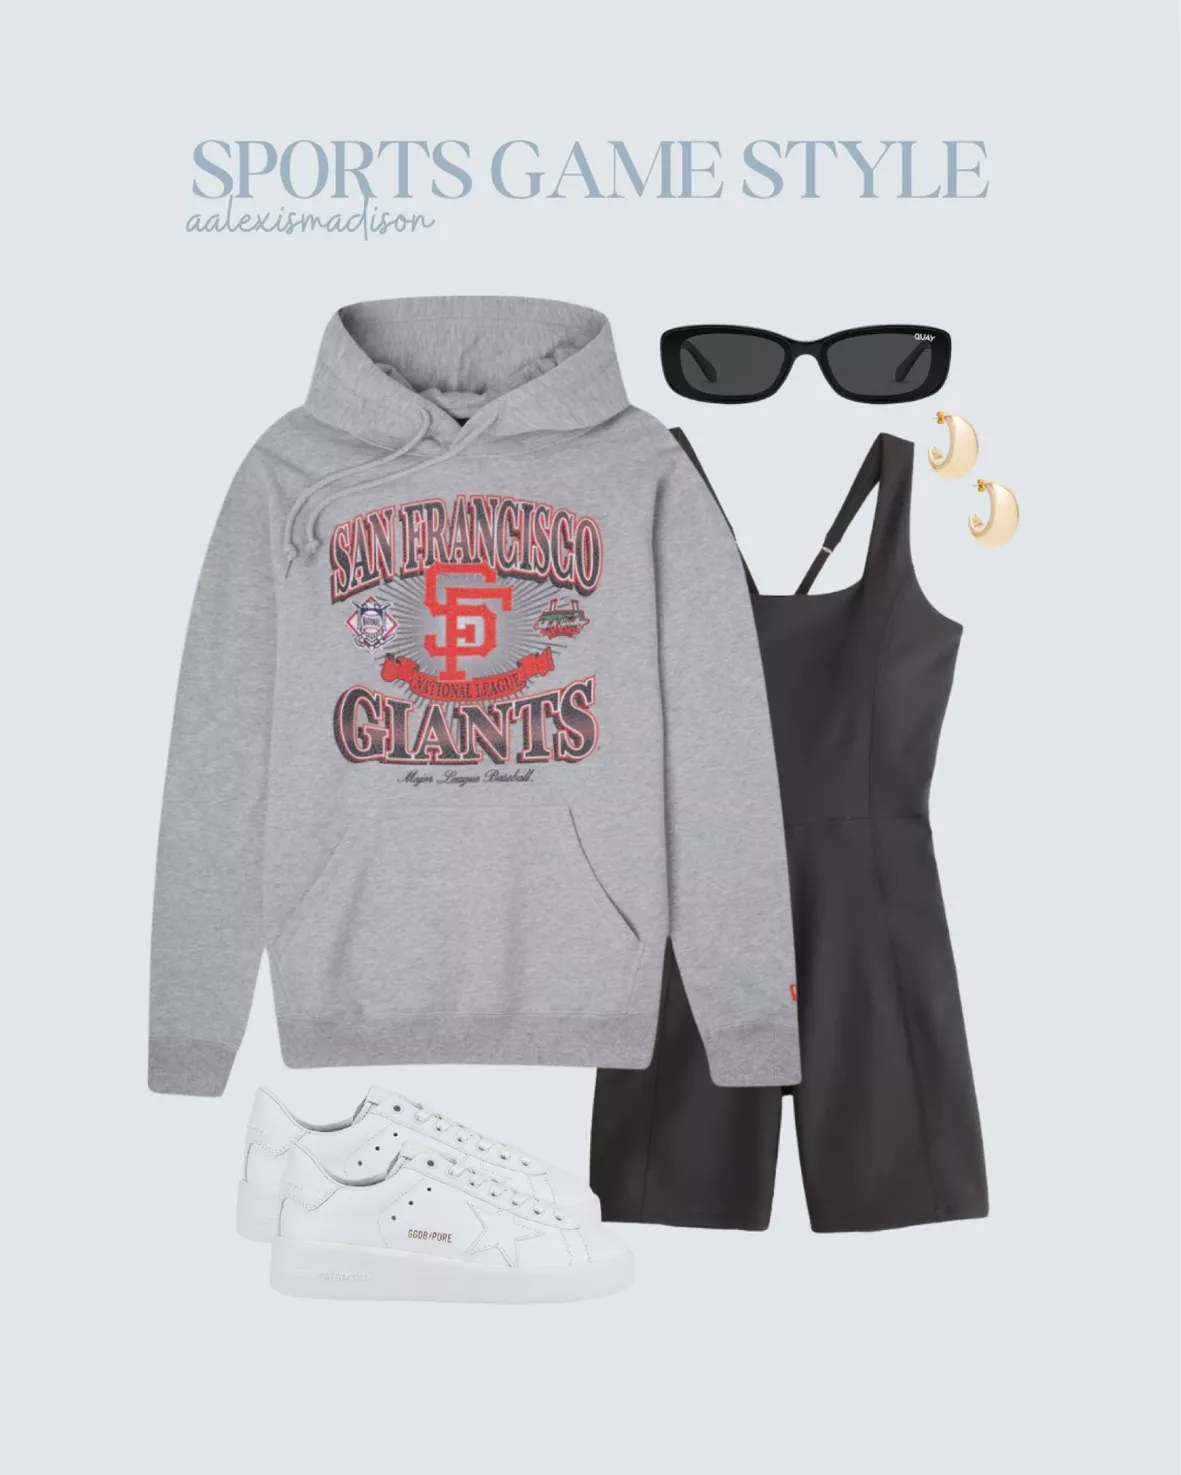 Game Day  Sf giants outfit, Gameday outfit, Baseball outfit